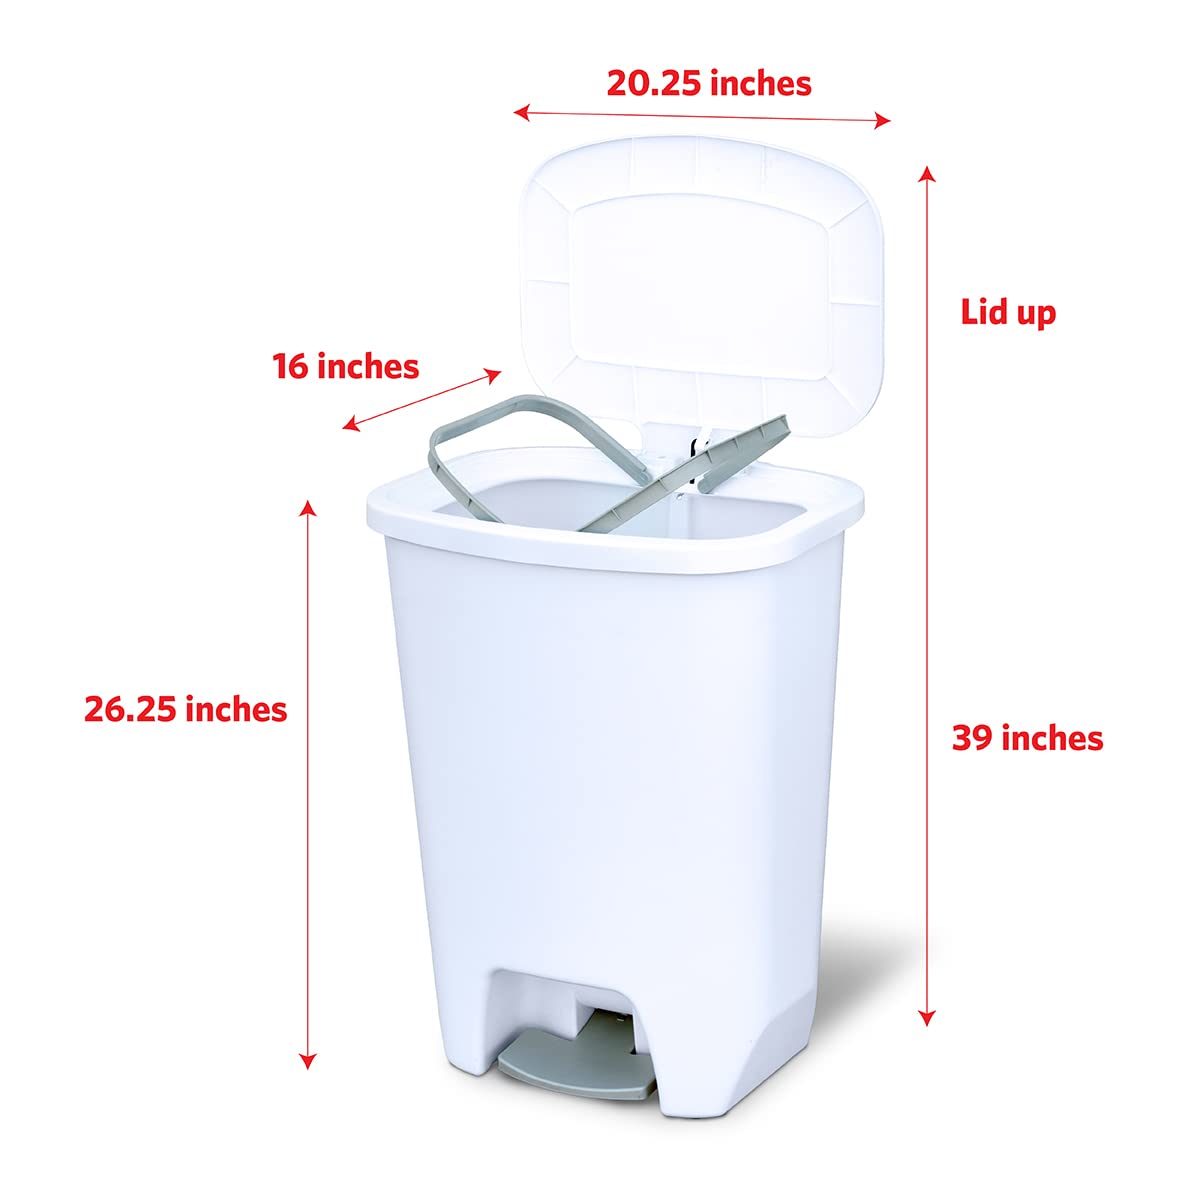 https://bigbigmart.com/wp-content/uploads/2023/10/Glad-Kitchen-Trash-Can-20-Gallon-Large-Plastic-Waste-Bin-with-Odor-Protection-of-Lid-Hands-Free-with-Step-On-Foot-Pedal-and-Garbage-Bag-Rings-20-Gallon-White2.jpg